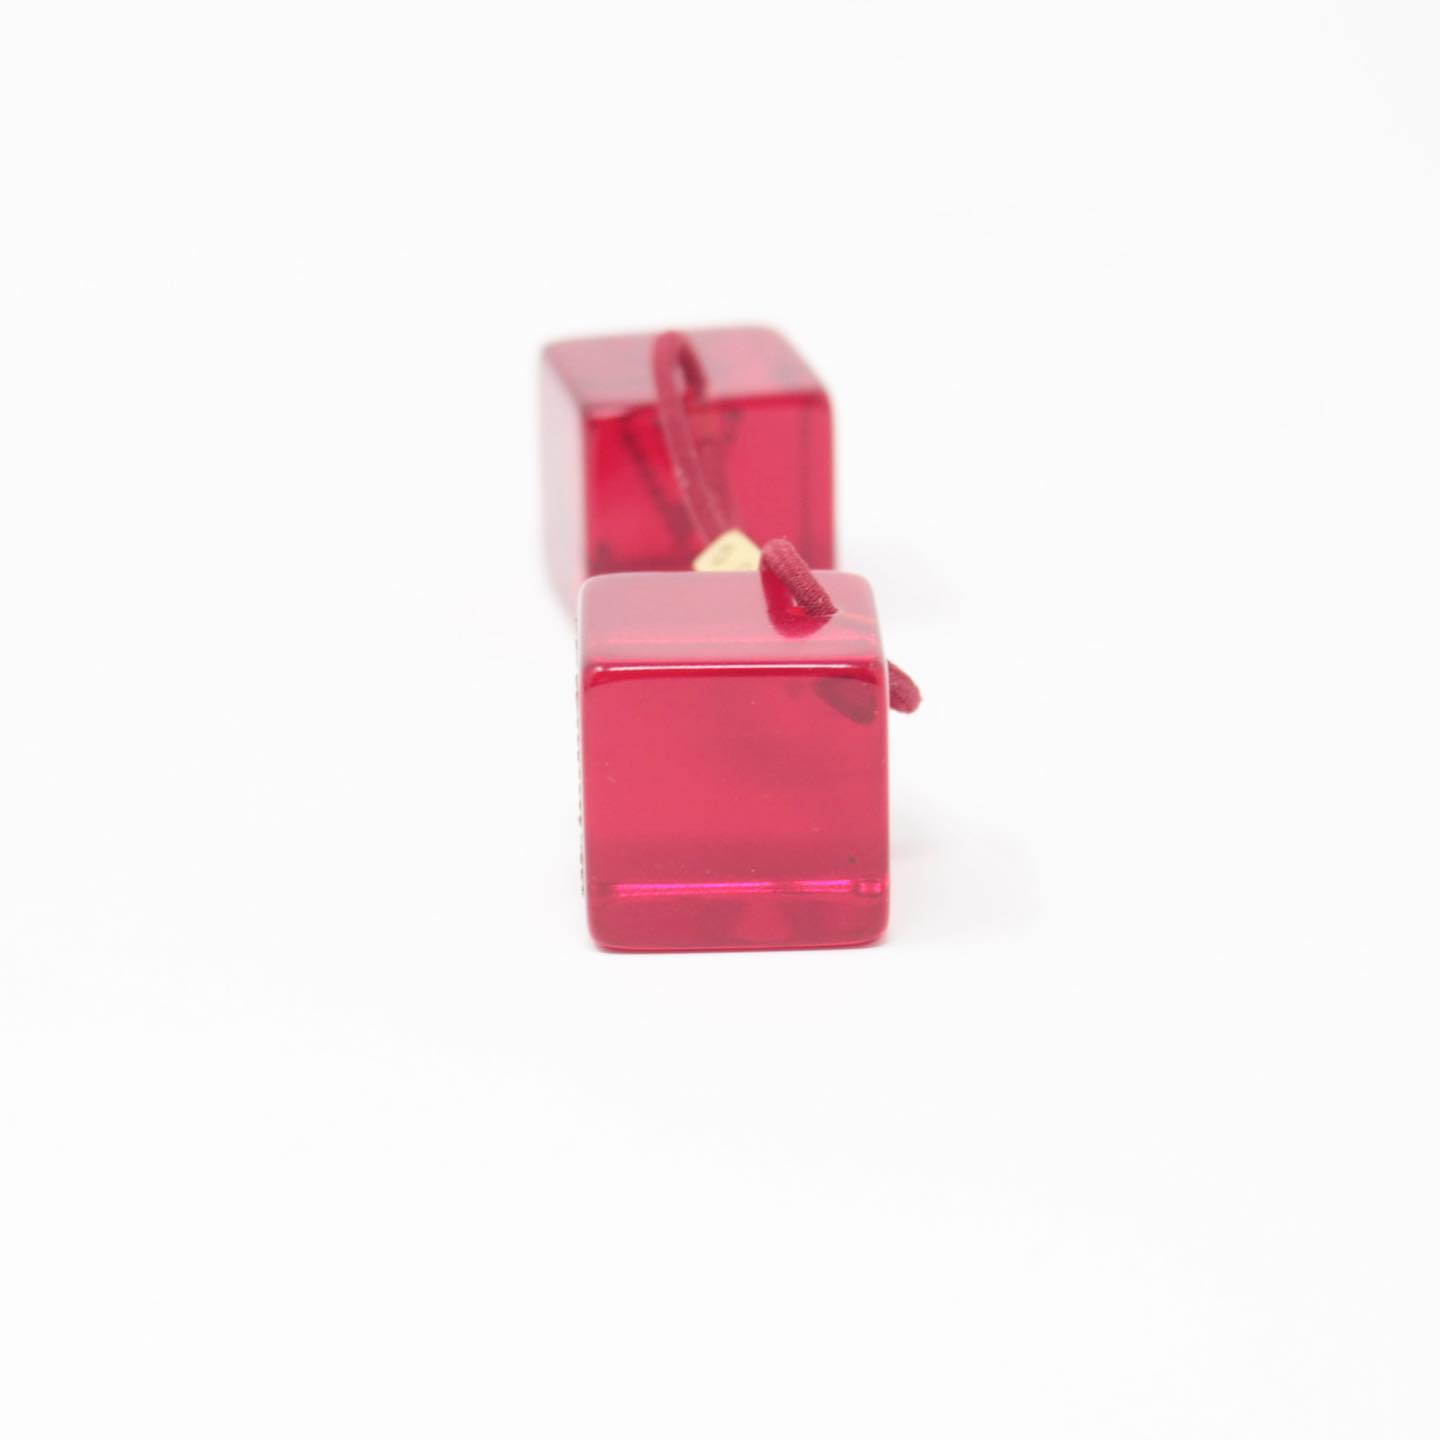 ON SALE* LOUIS VUITTON Red Cube Hair Tie Accessory #25681 – ALL YOUR BLISS